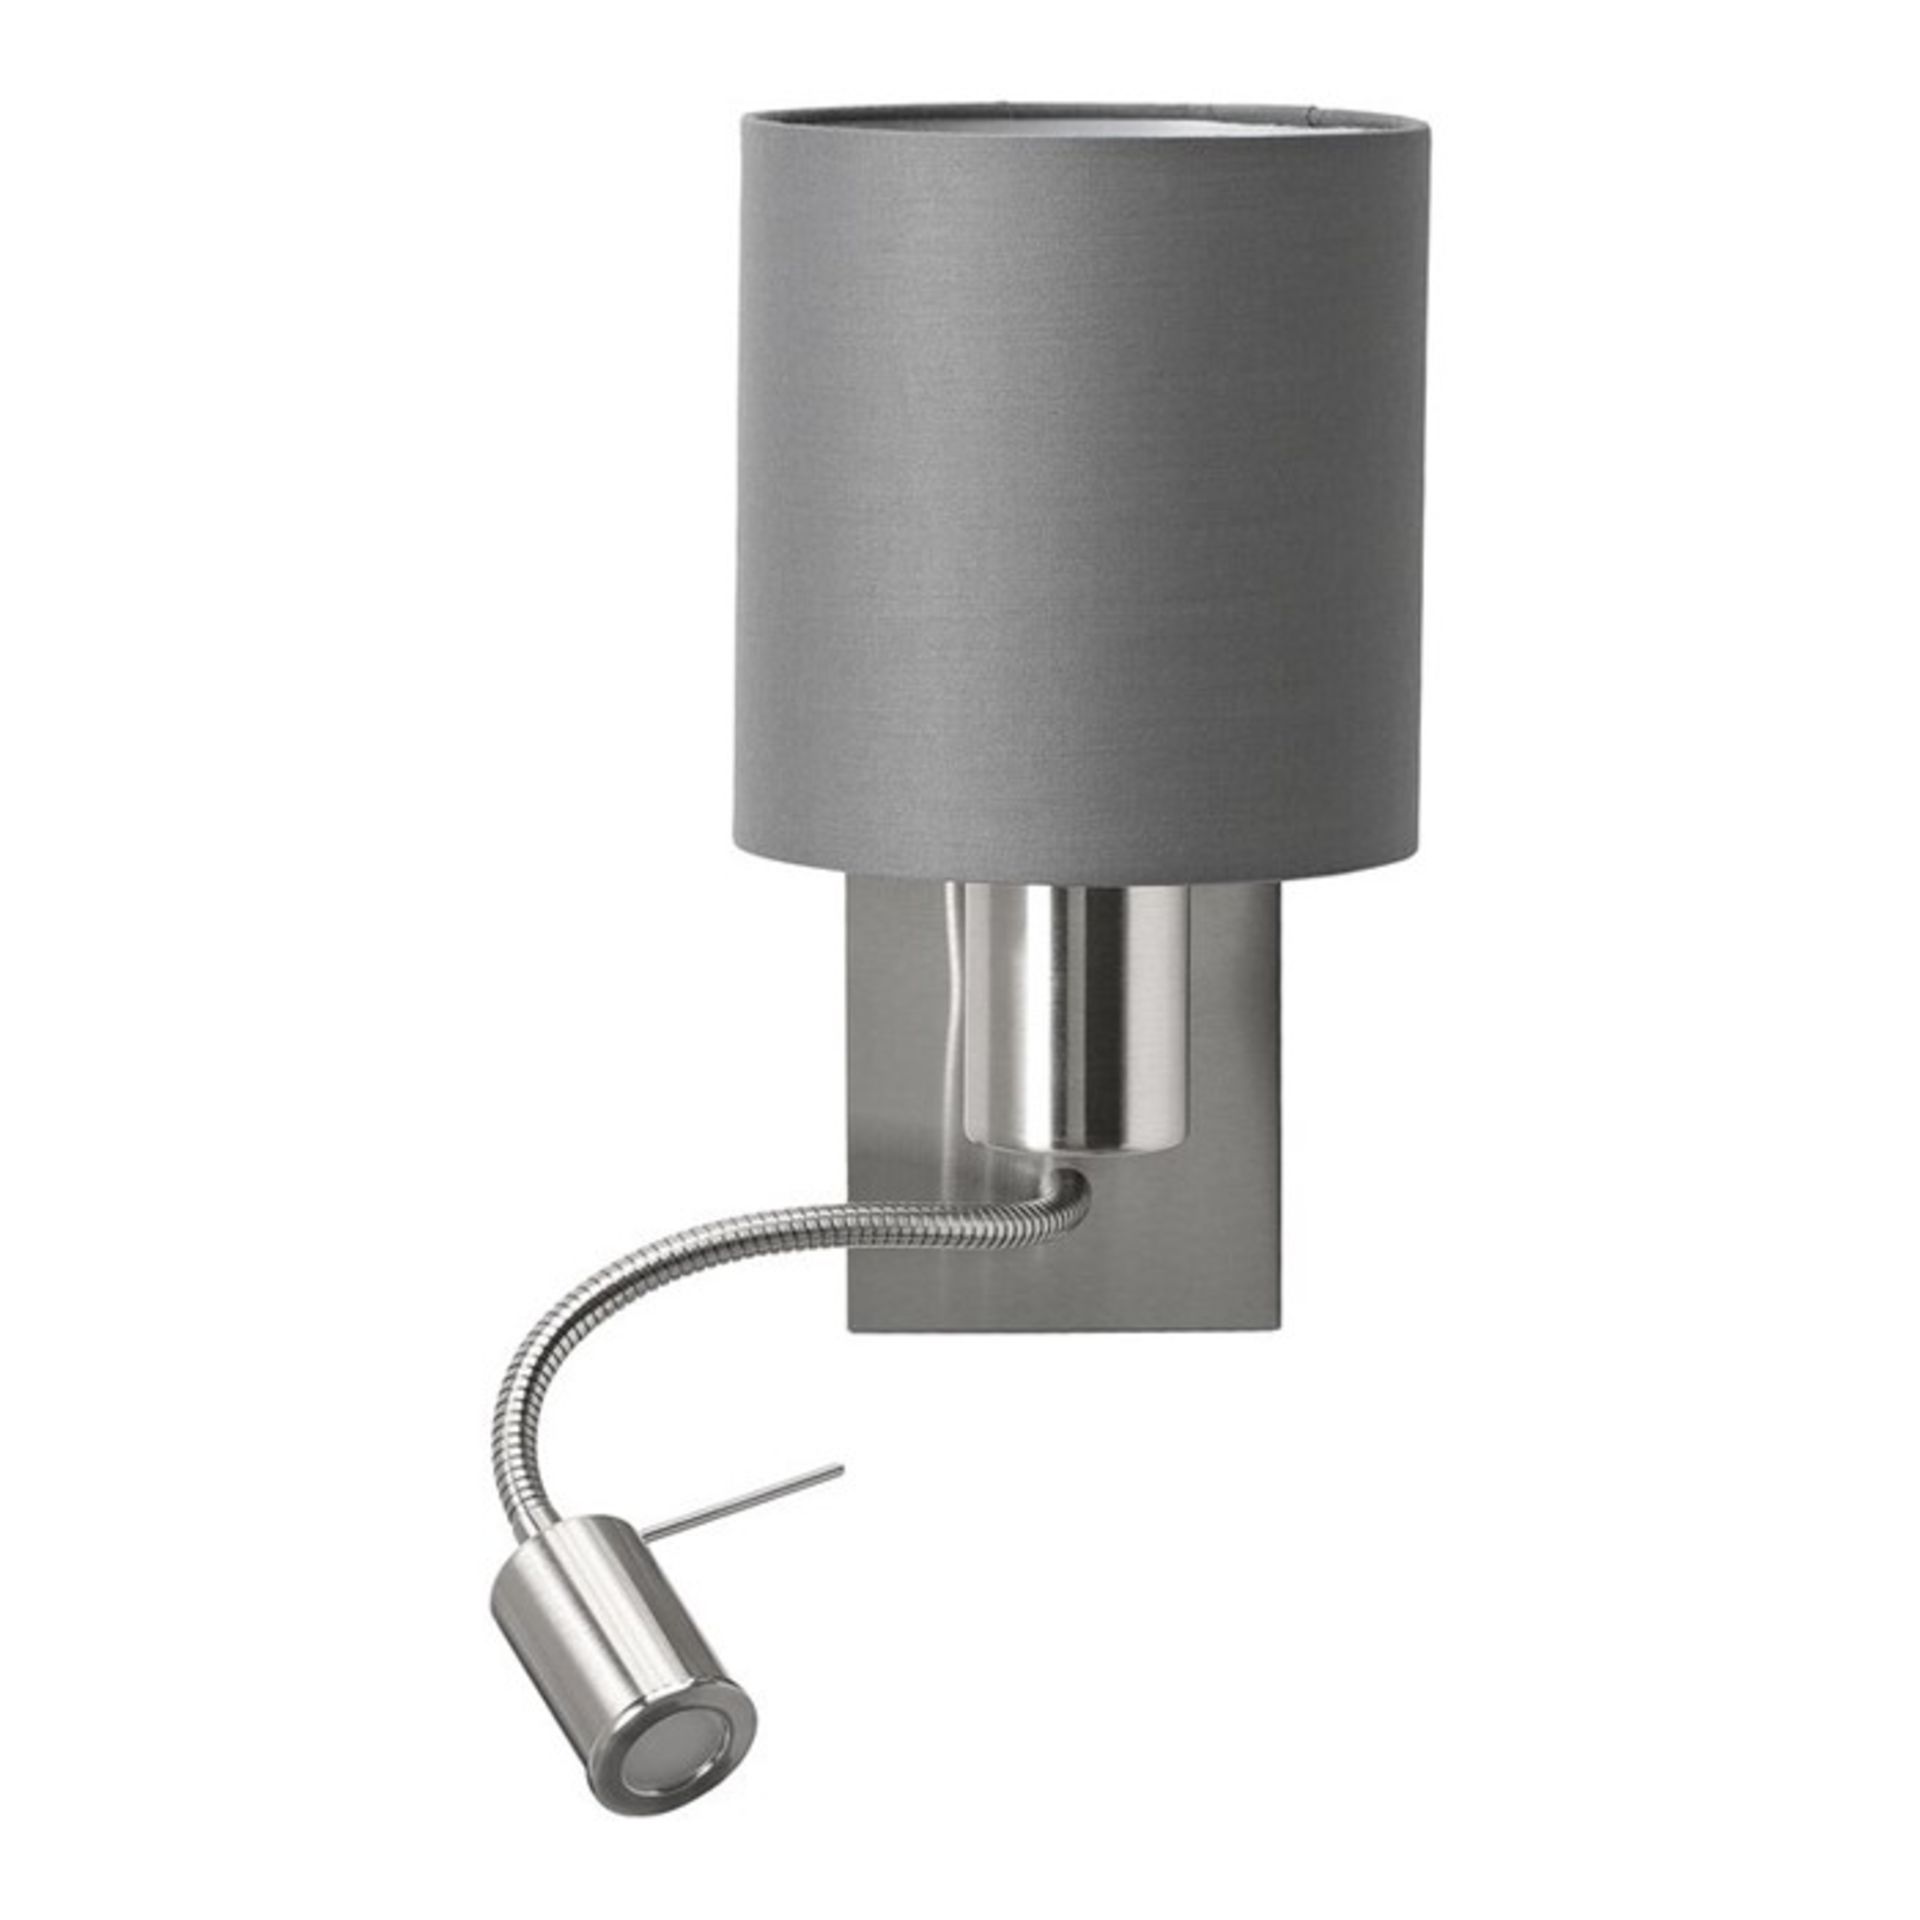 Zipcode Design ,Patience 2-Light LED Sconce Shade